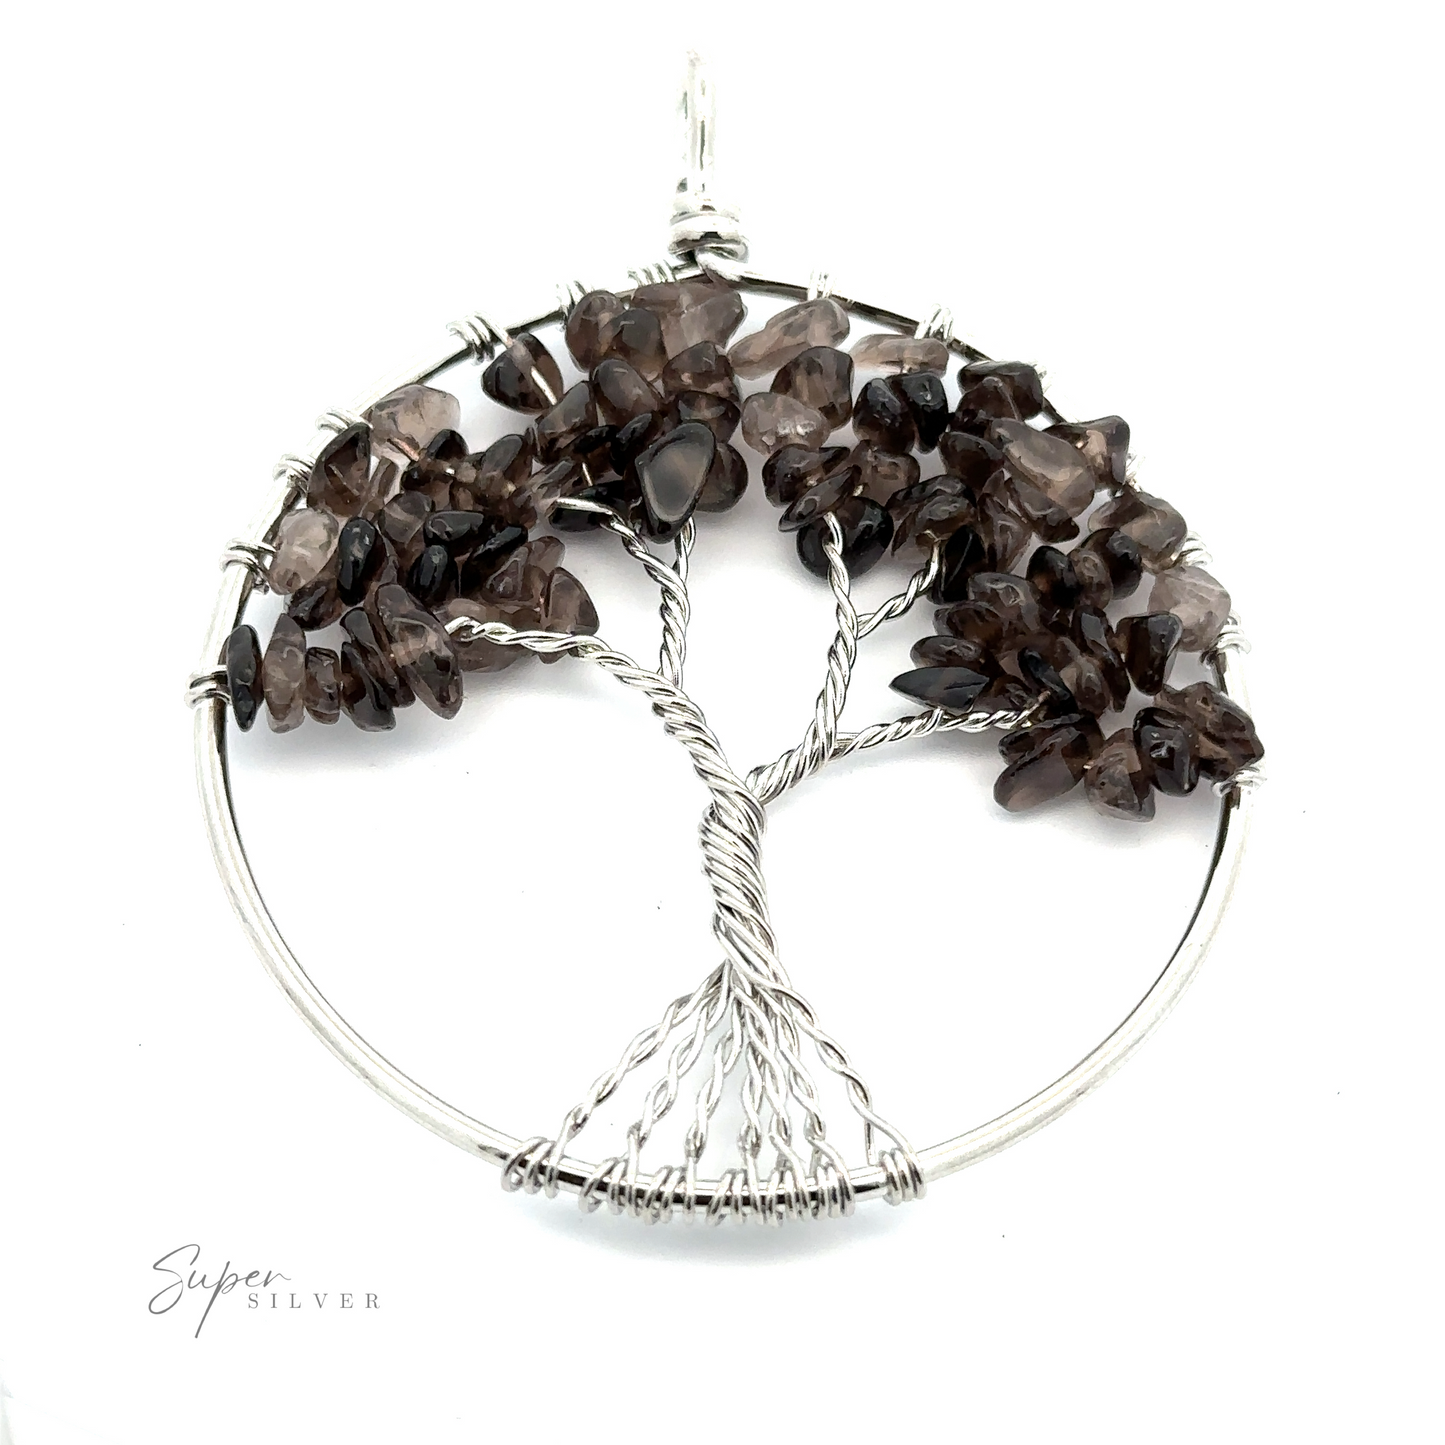 
                  
                    A Wire Wrapped Tree of Life Pendant featuring a wire-wrapped tree adorned with small, dark gemstone chips. The mixed metals wire forms the tree's trunk and branches, and the pendant has a clasp at the top.
                  
                